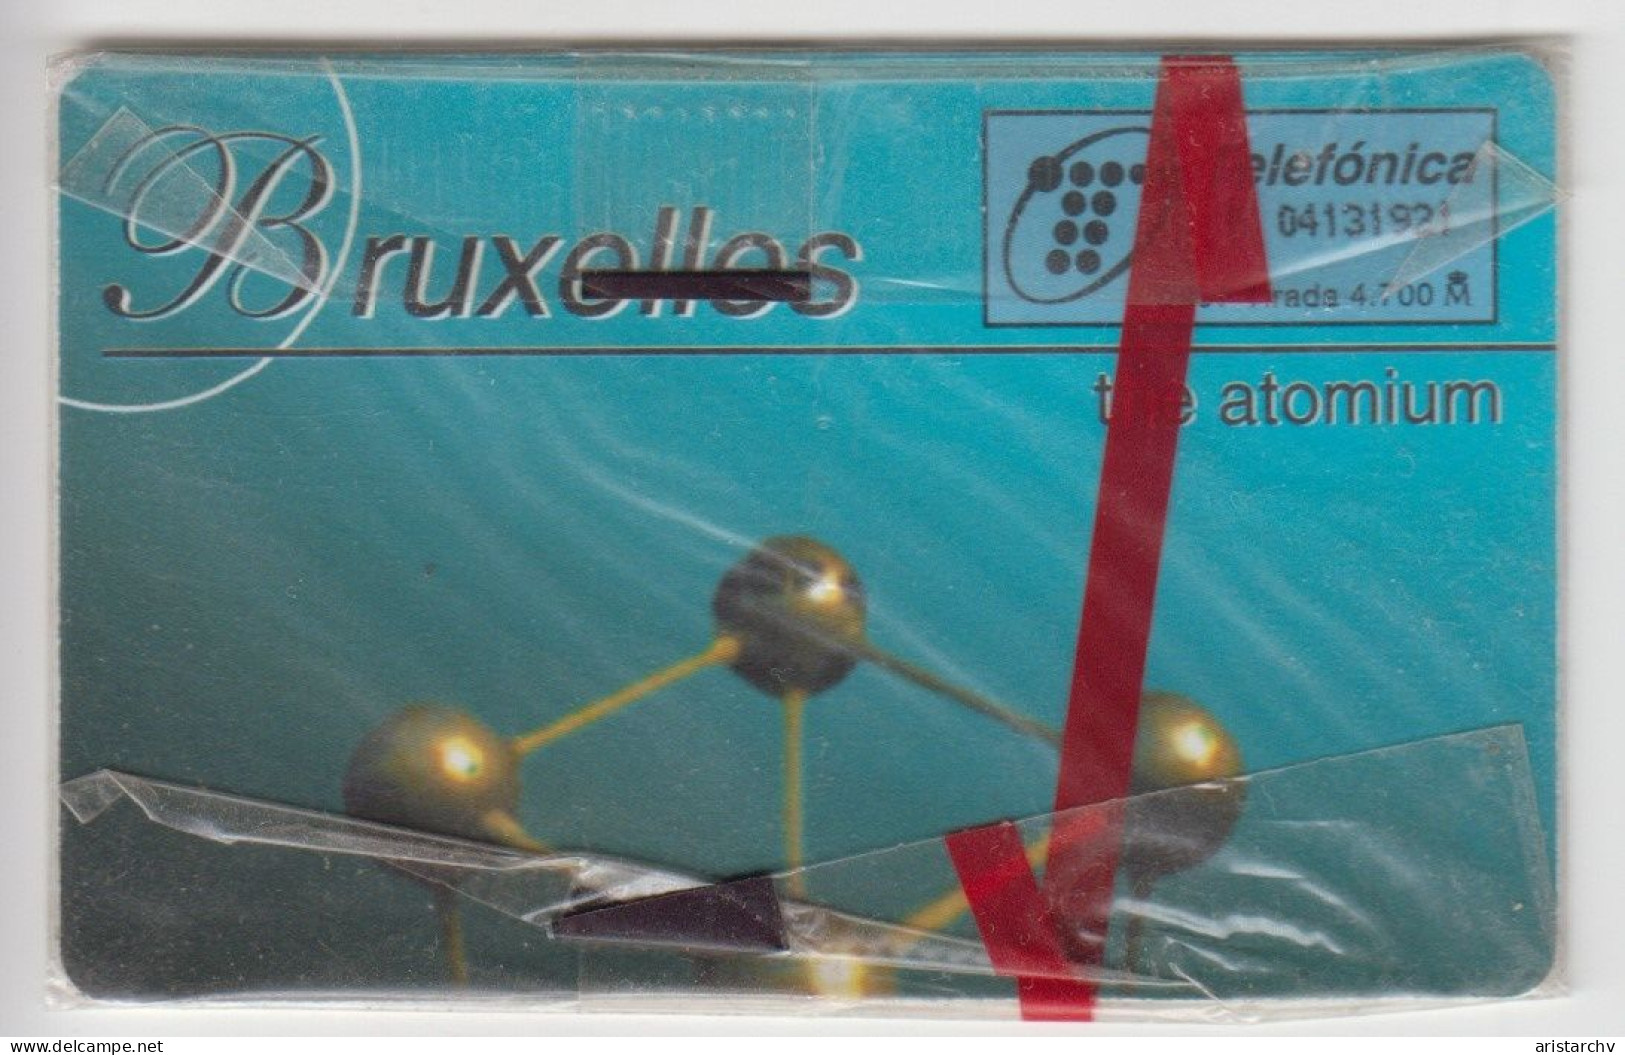 SPAIN 1997 CARD COLLECT '98 THESSALONIKI GREECE BRUXELLES ATOMIUM MINT CARD IN BLISTER - Privé-uitgaven